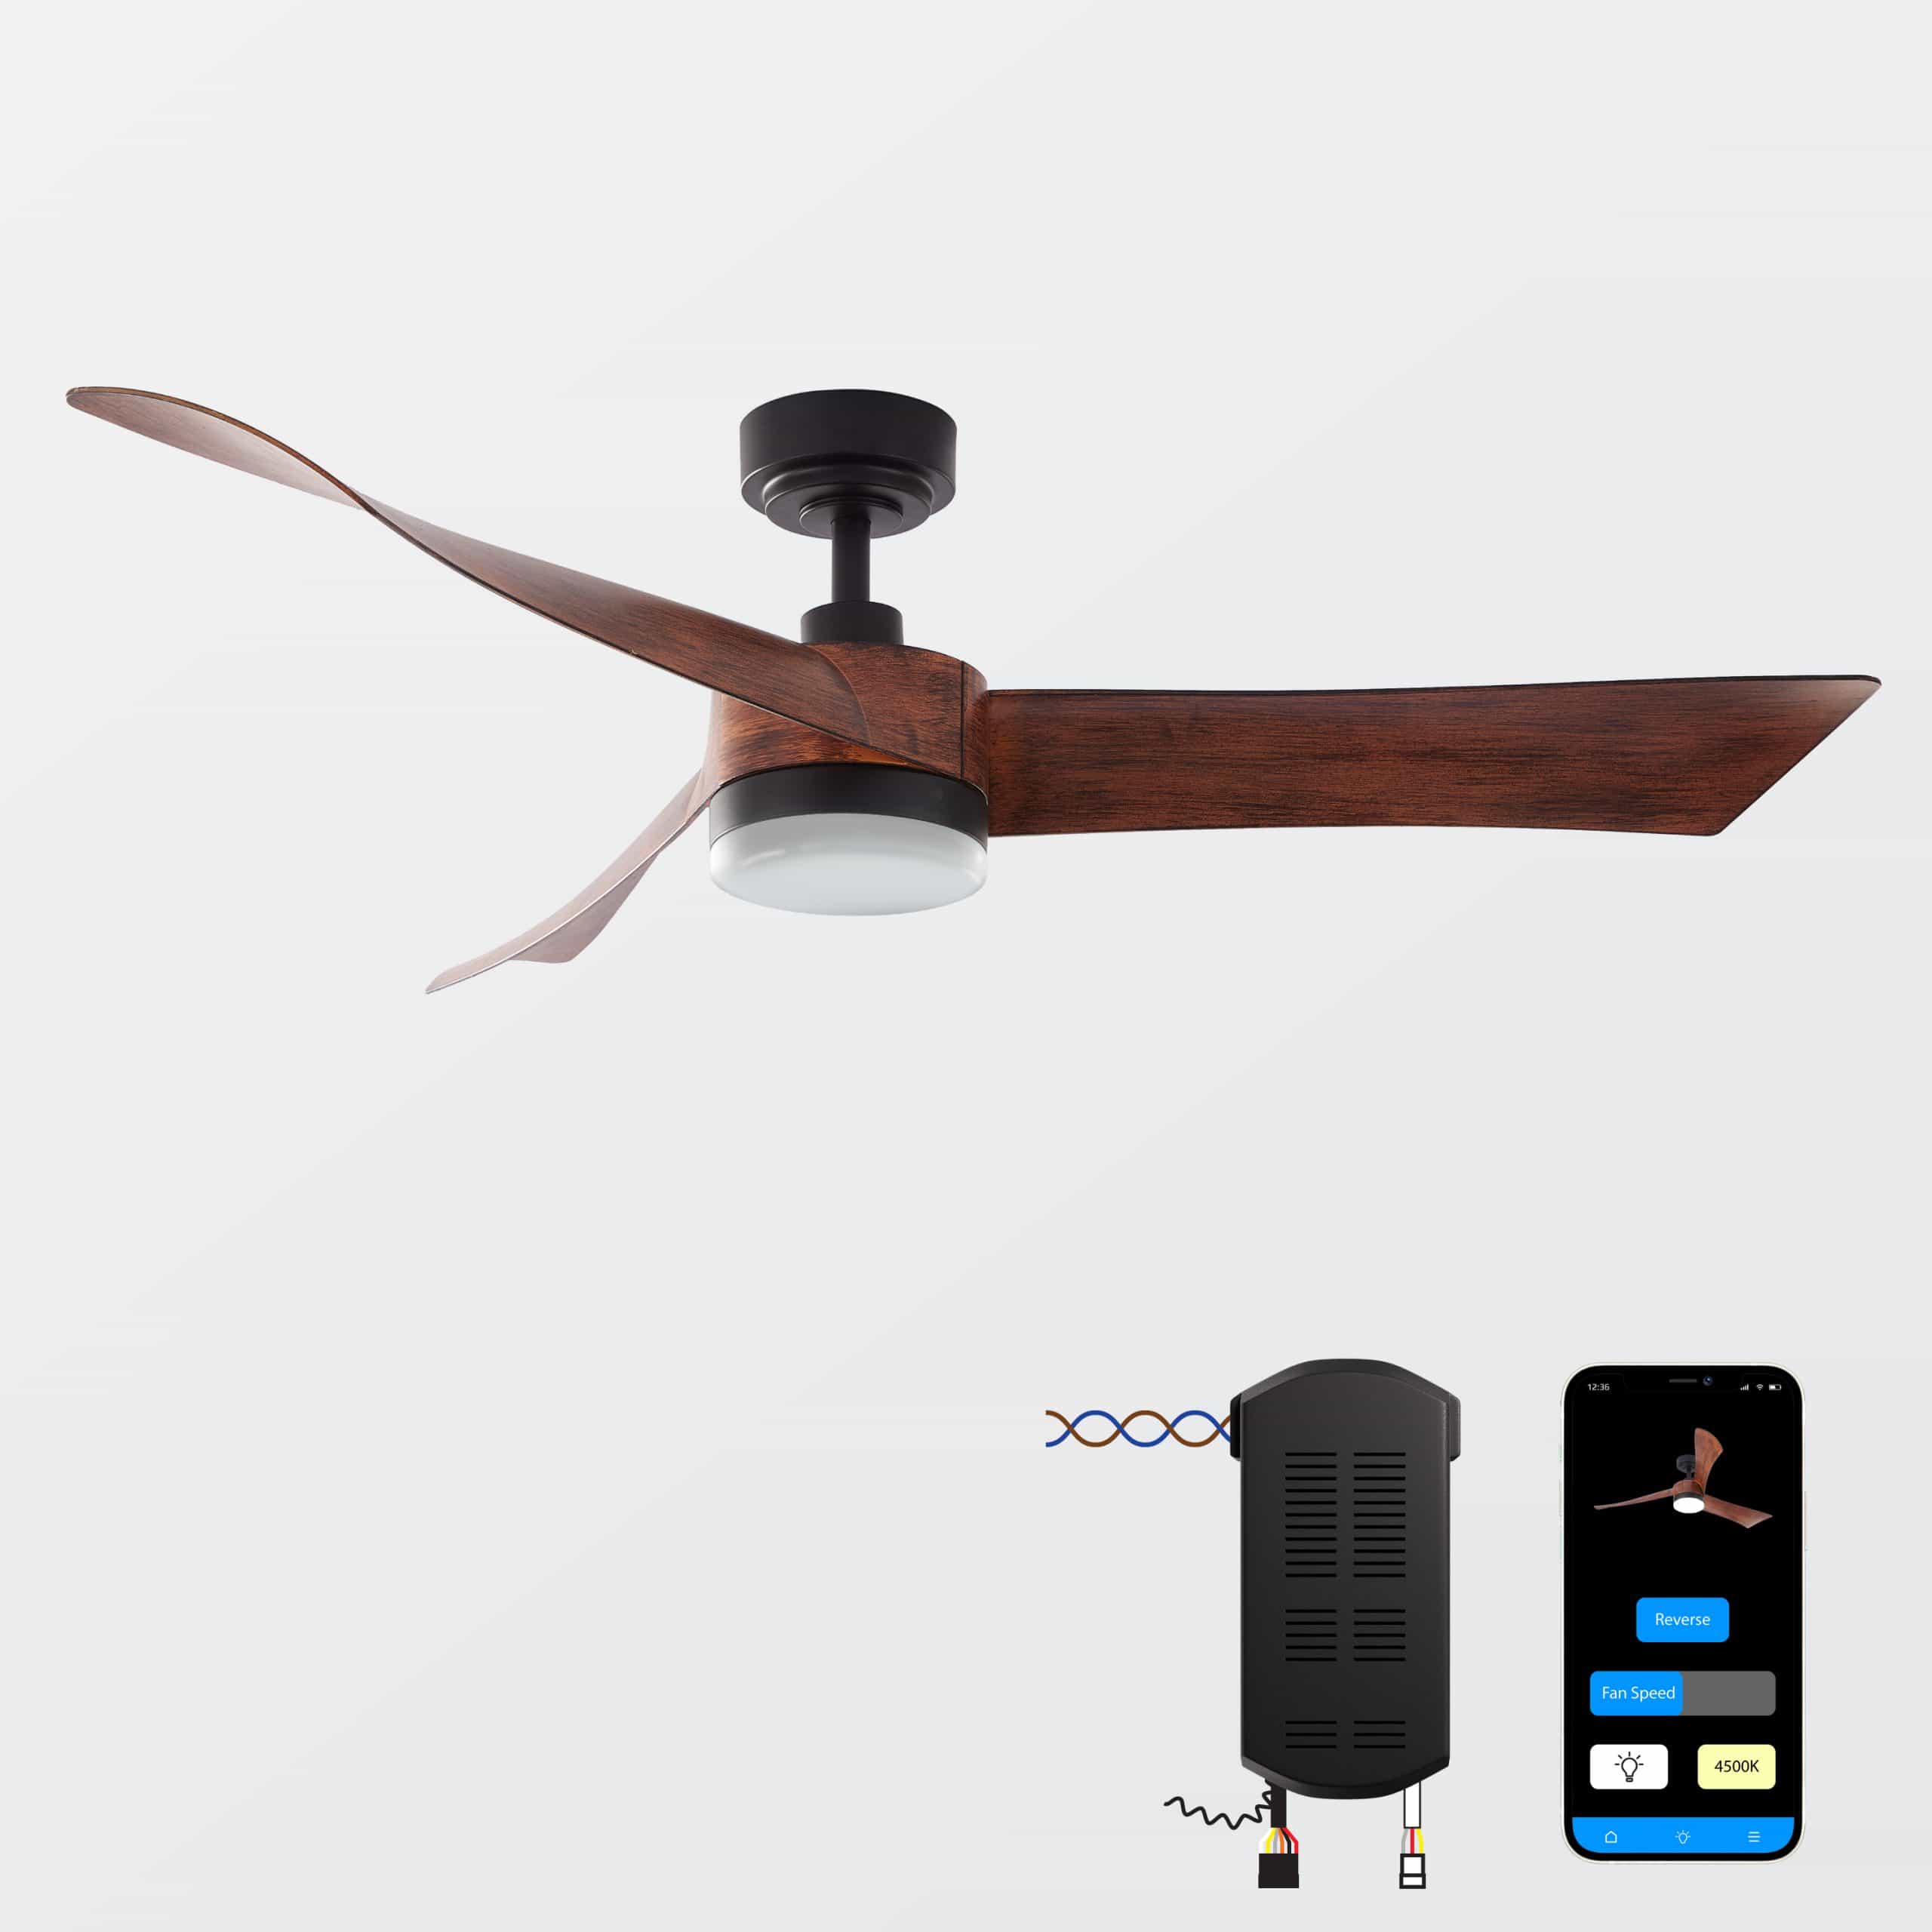 ProMounts Smart Voice Control Ceiling Fan 54-inch. 3-Blade with LED Lights and Reverse Airflow in Walnut (OHCF03-WT)